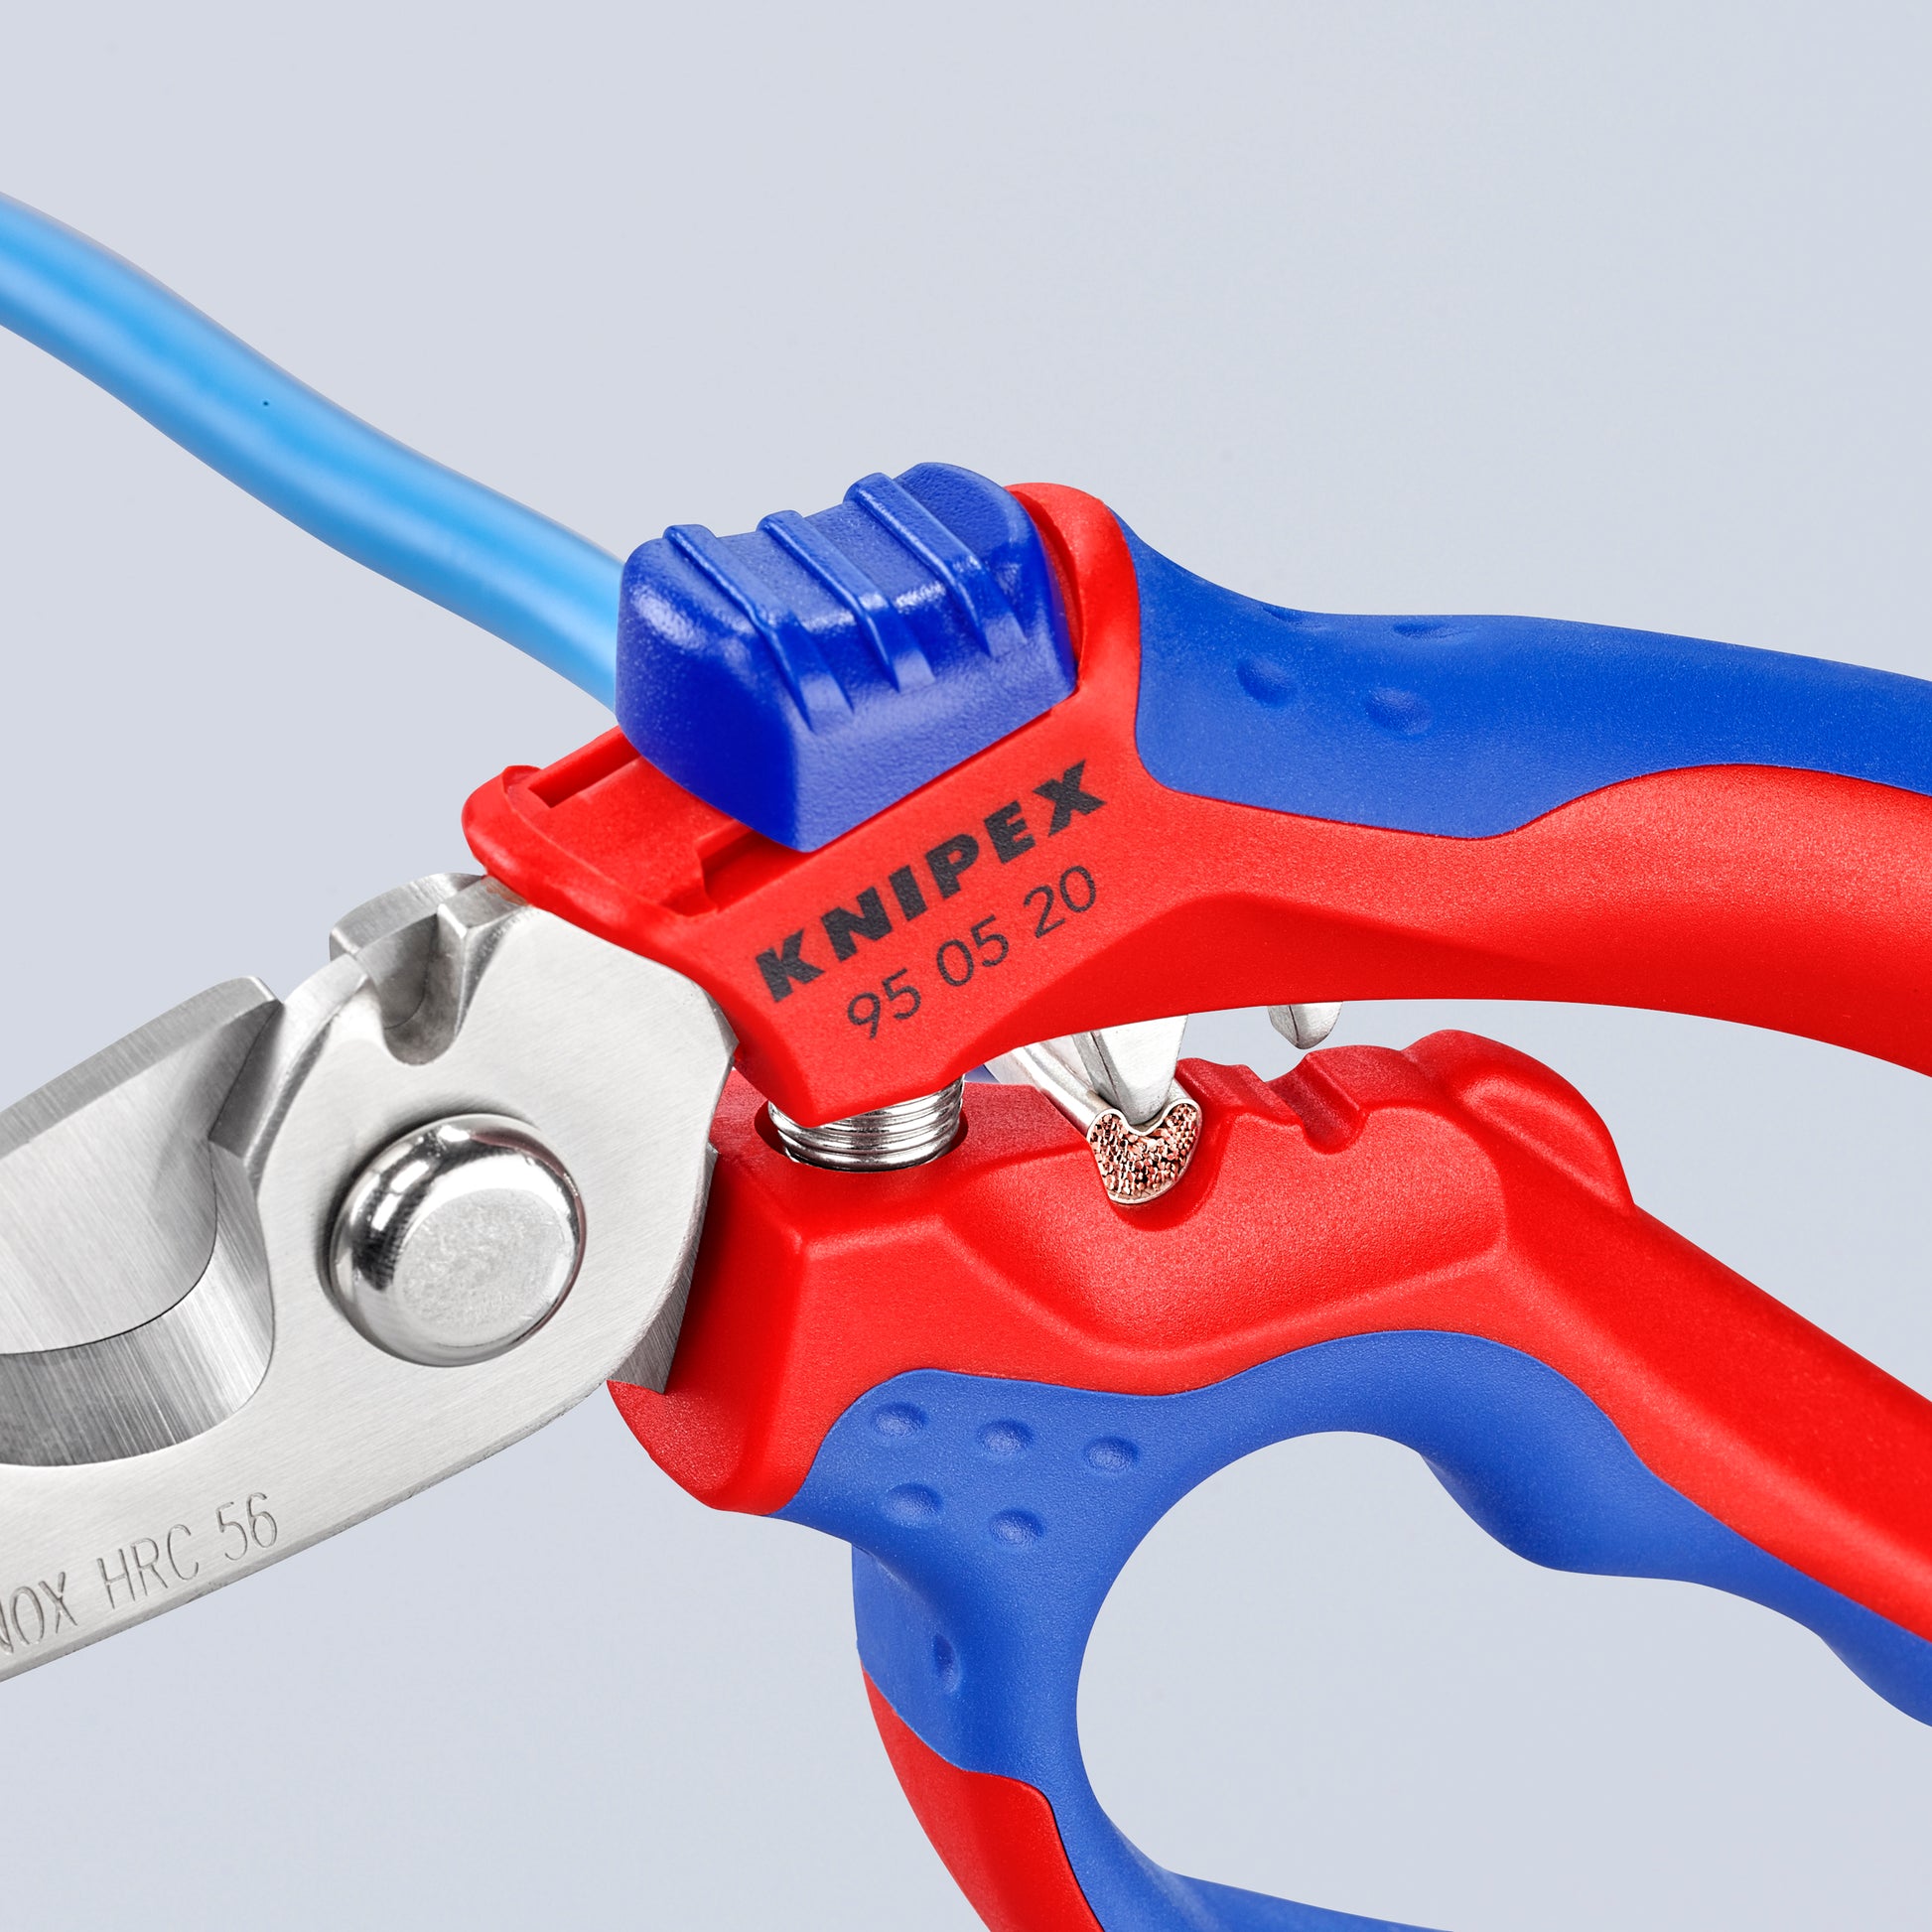 Electricians shears KNIPEX Tools 95 05 155